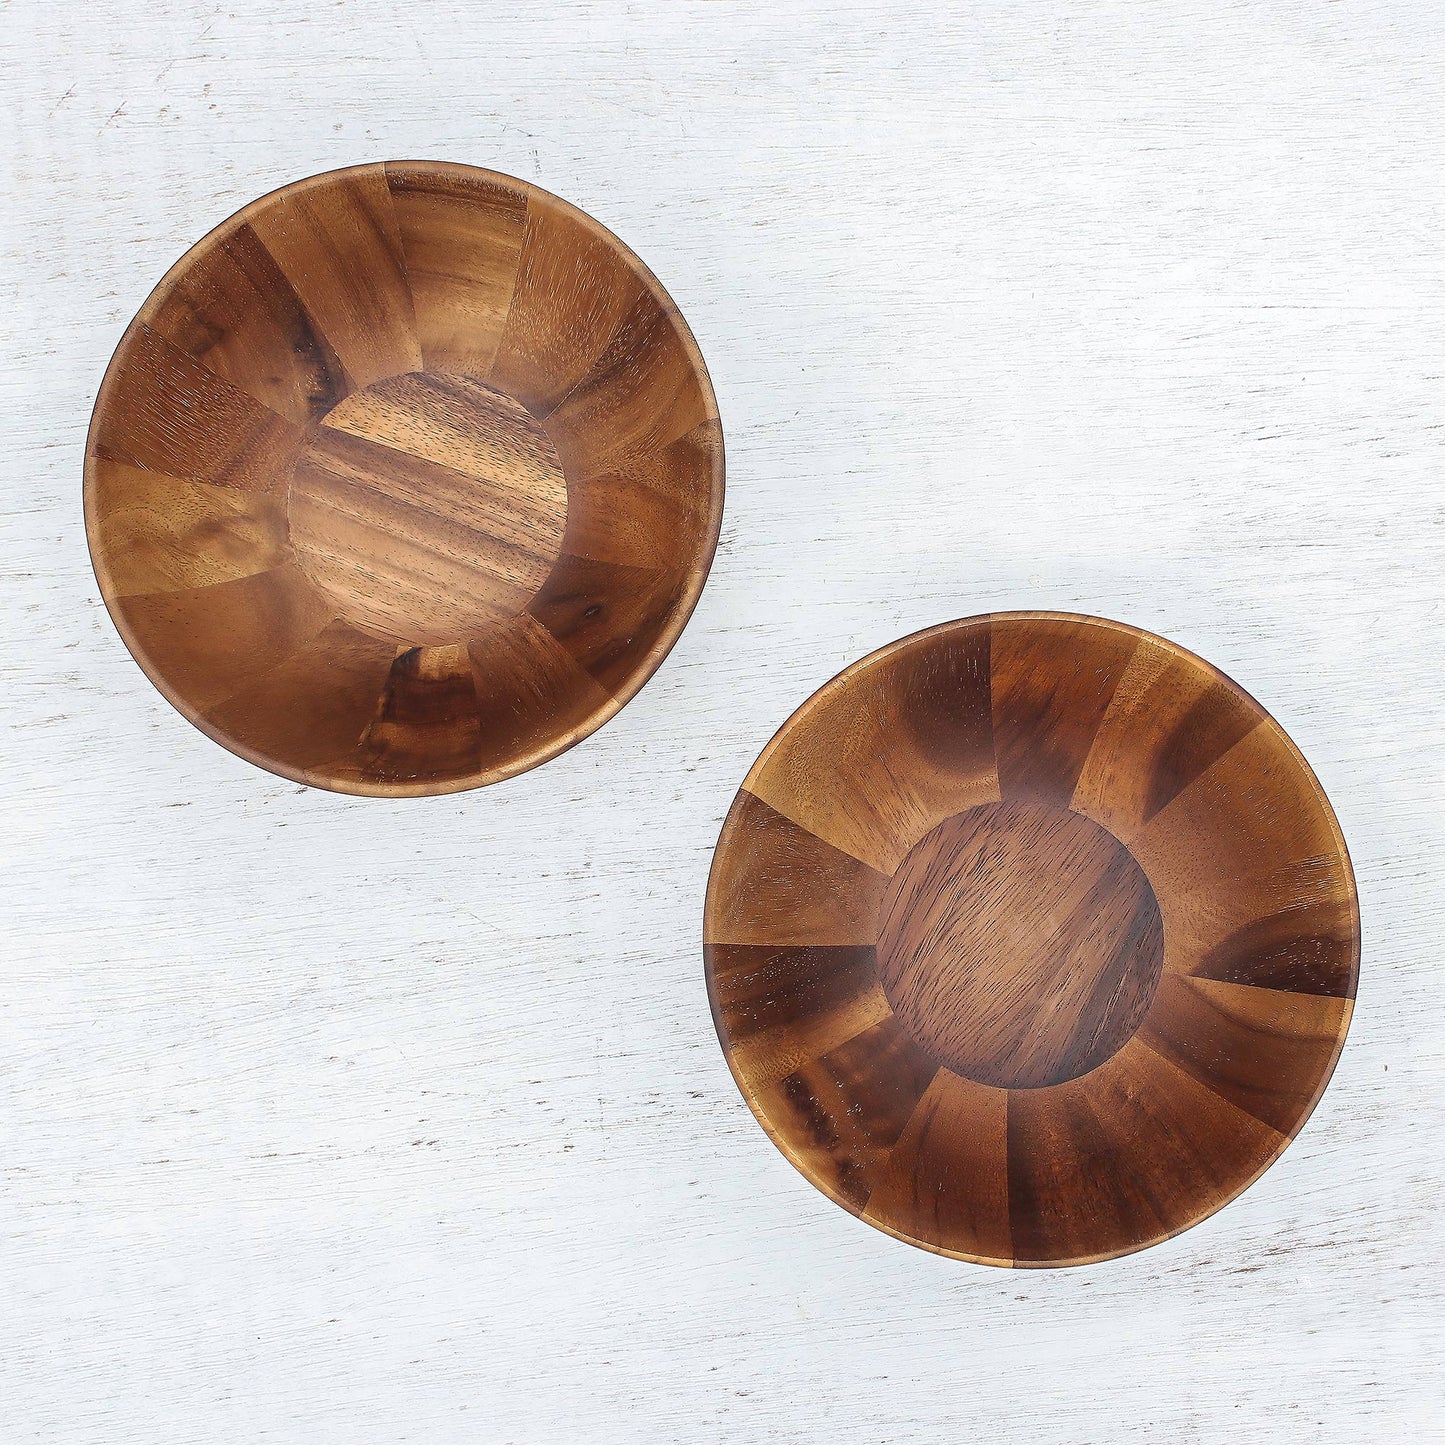 Exquisite Meal Handmade Raintree Wood Bowls from Thailand (Pair)